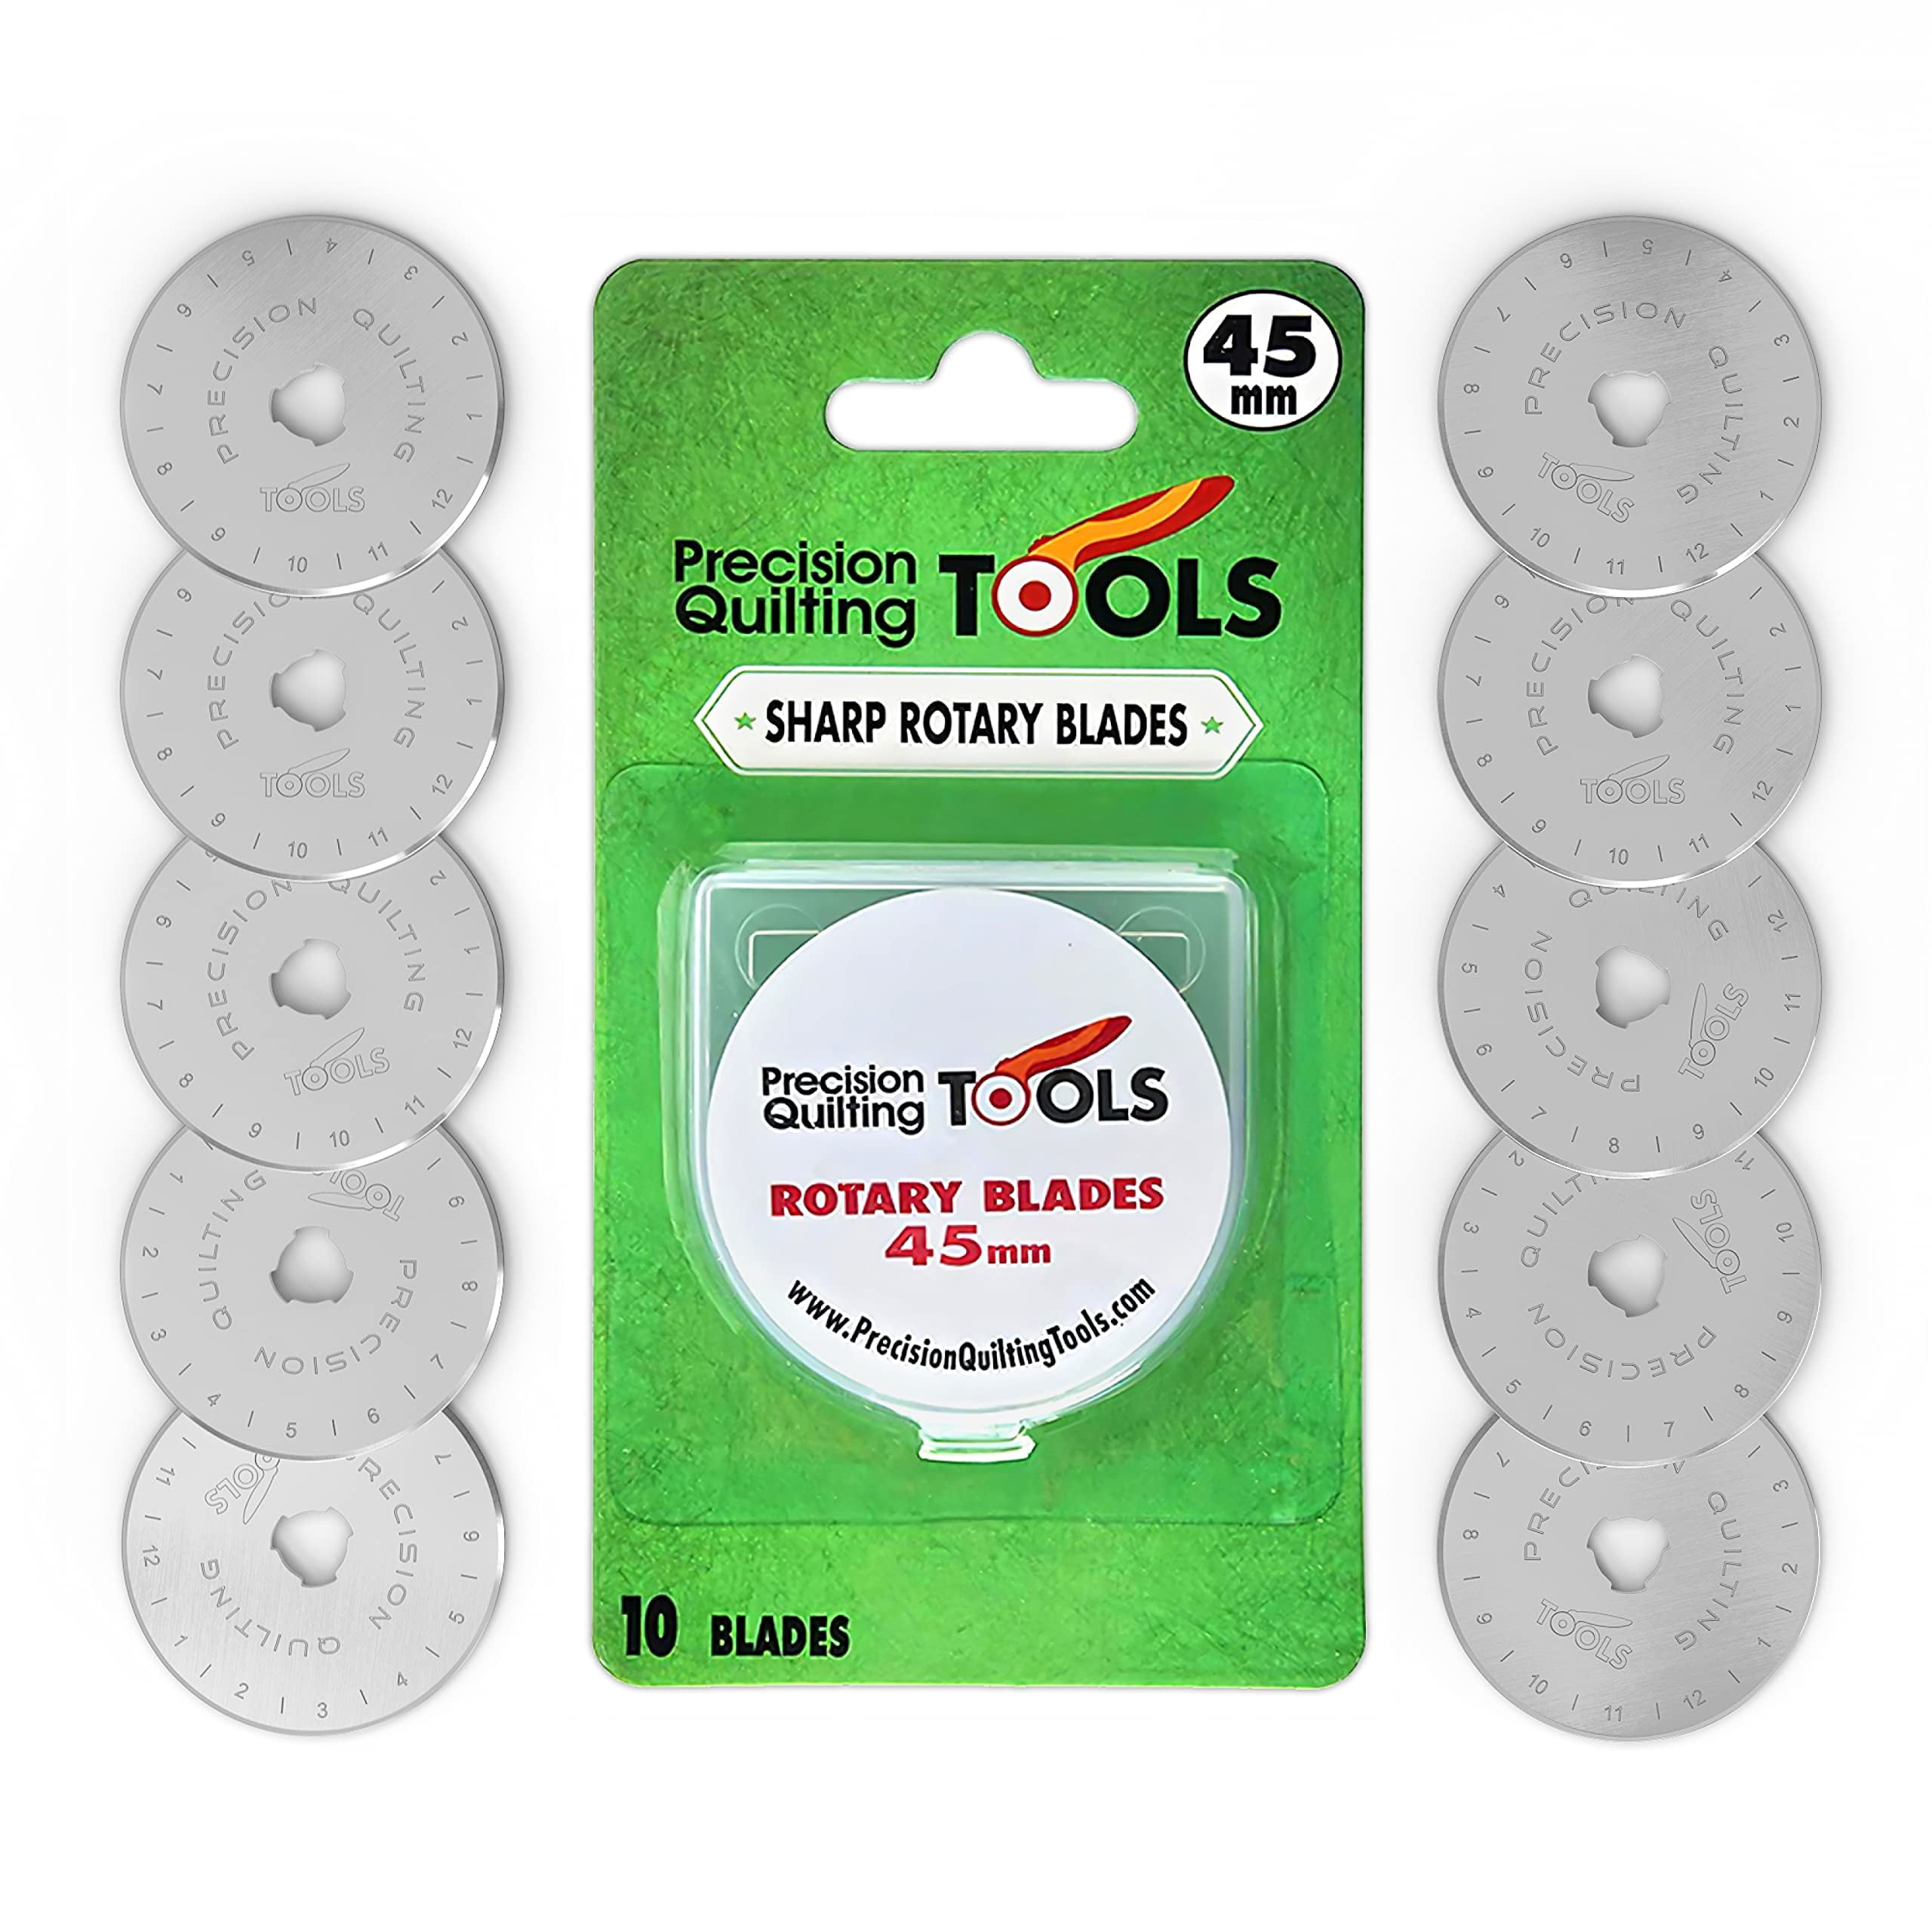 Precision Quilting Tools | 10 Pack of 45mm Rotary Cutter Blades for Quilting